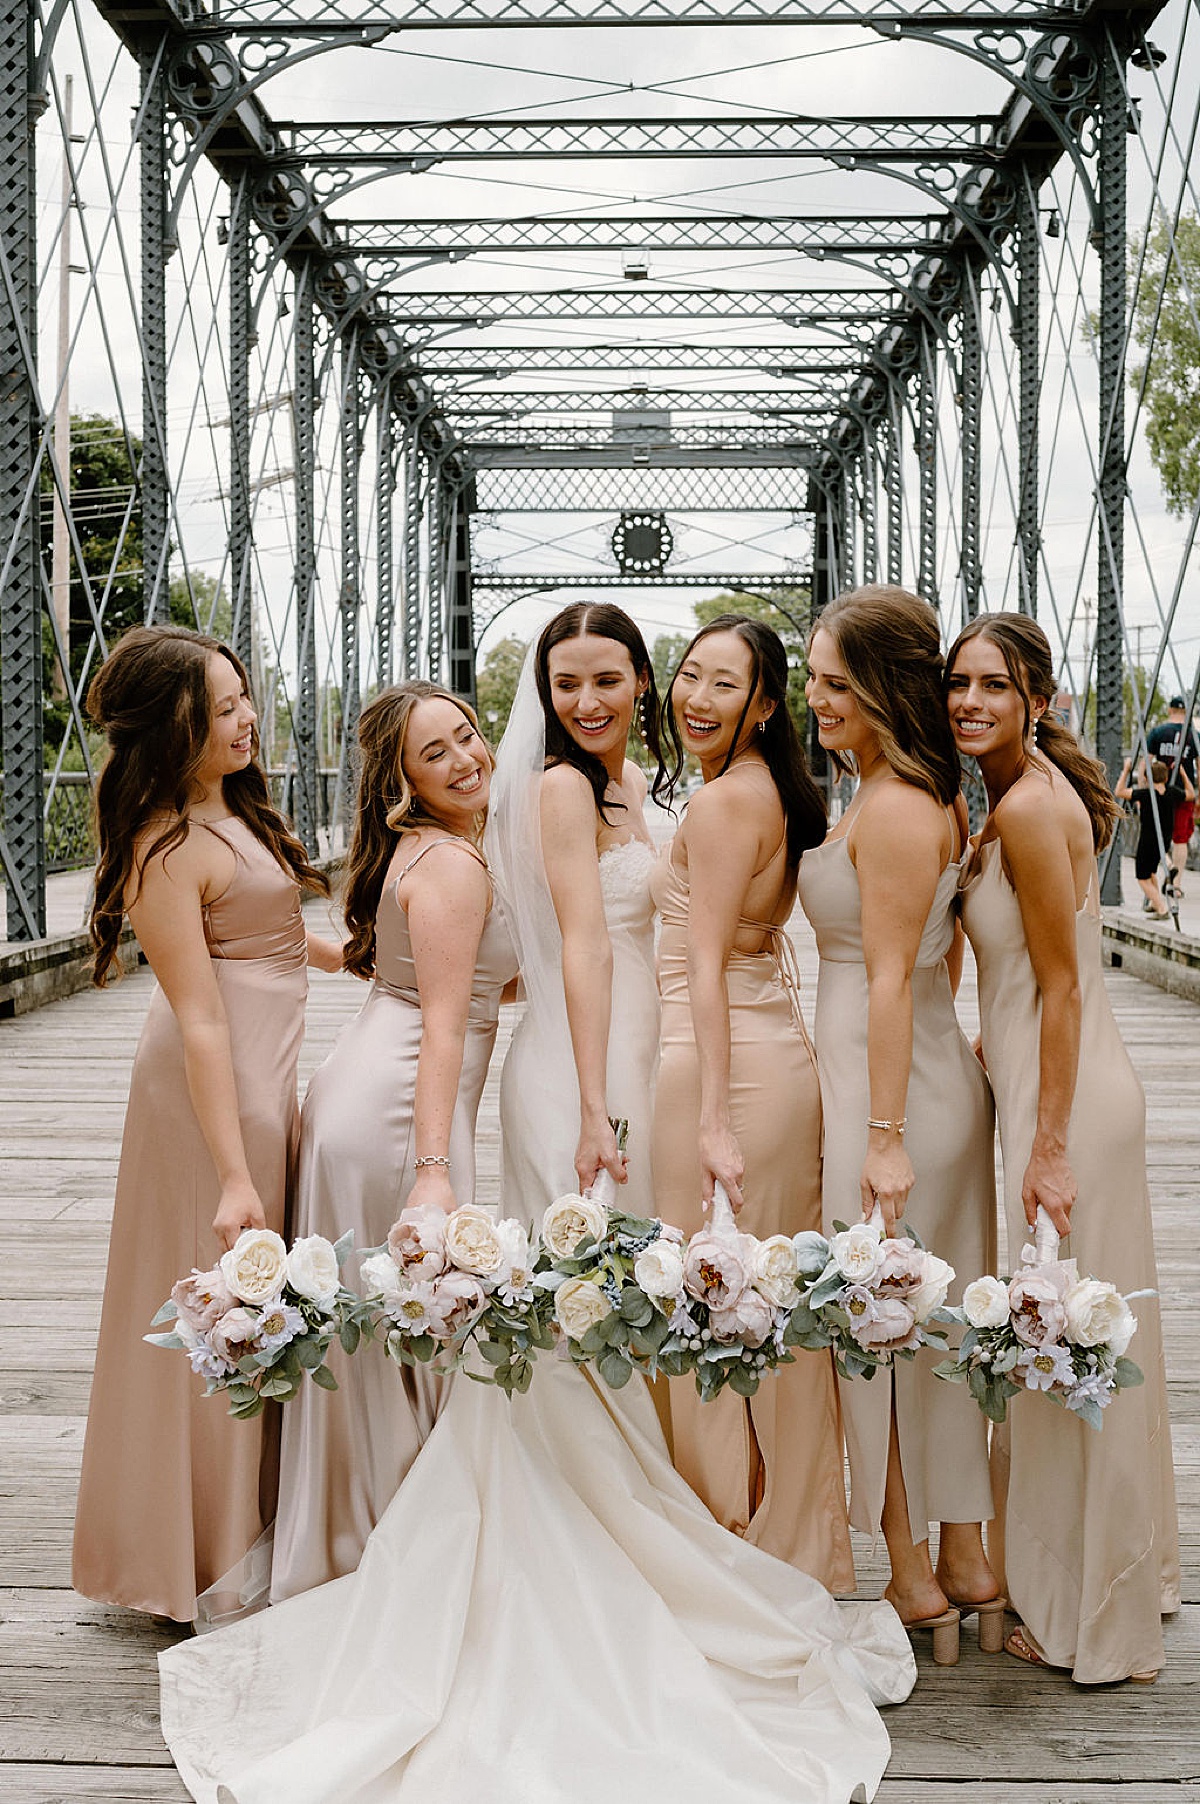 bridesmaids in champagne satin dresses pose with elegant bride holding white bouquets during shoot by Indigo Lace Collective